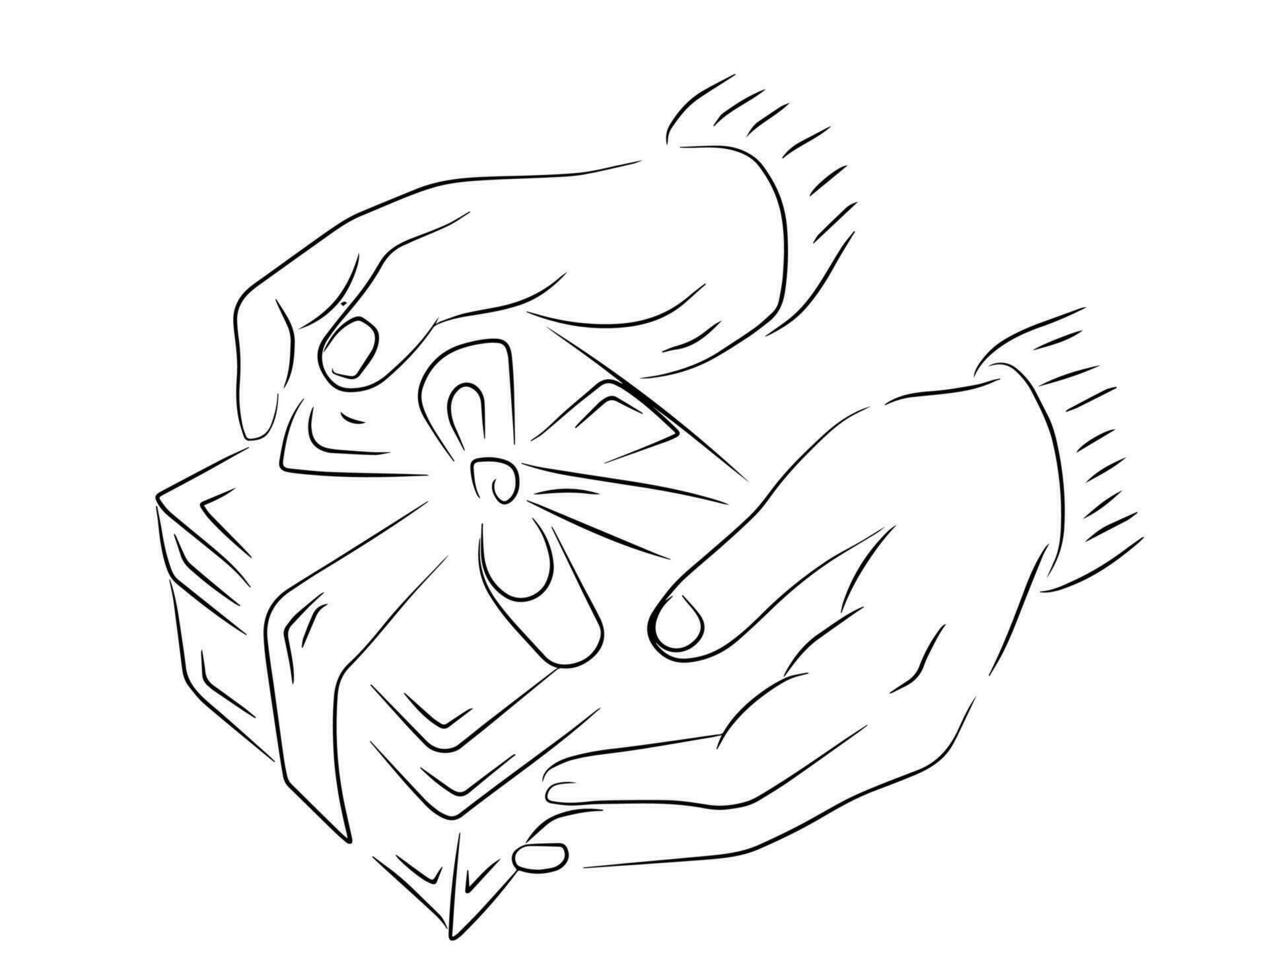 a hand holding giftbox line art silhouette illustration vector